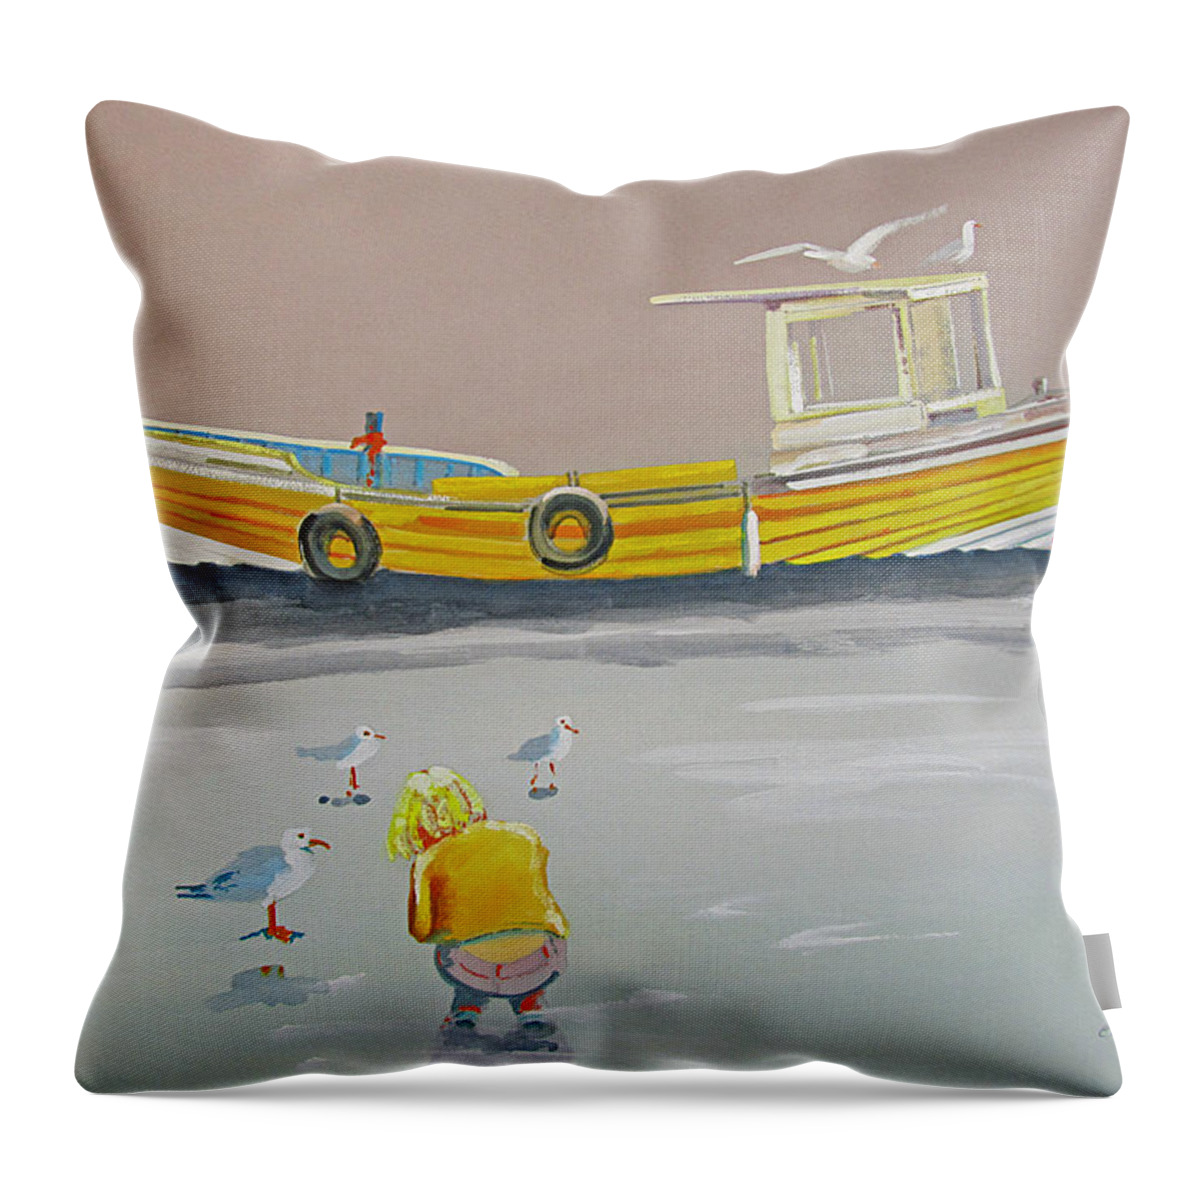 Fishing Boat Throw Pillow featuring the painting Seagulls With Fishing Boat by Charles Stuart